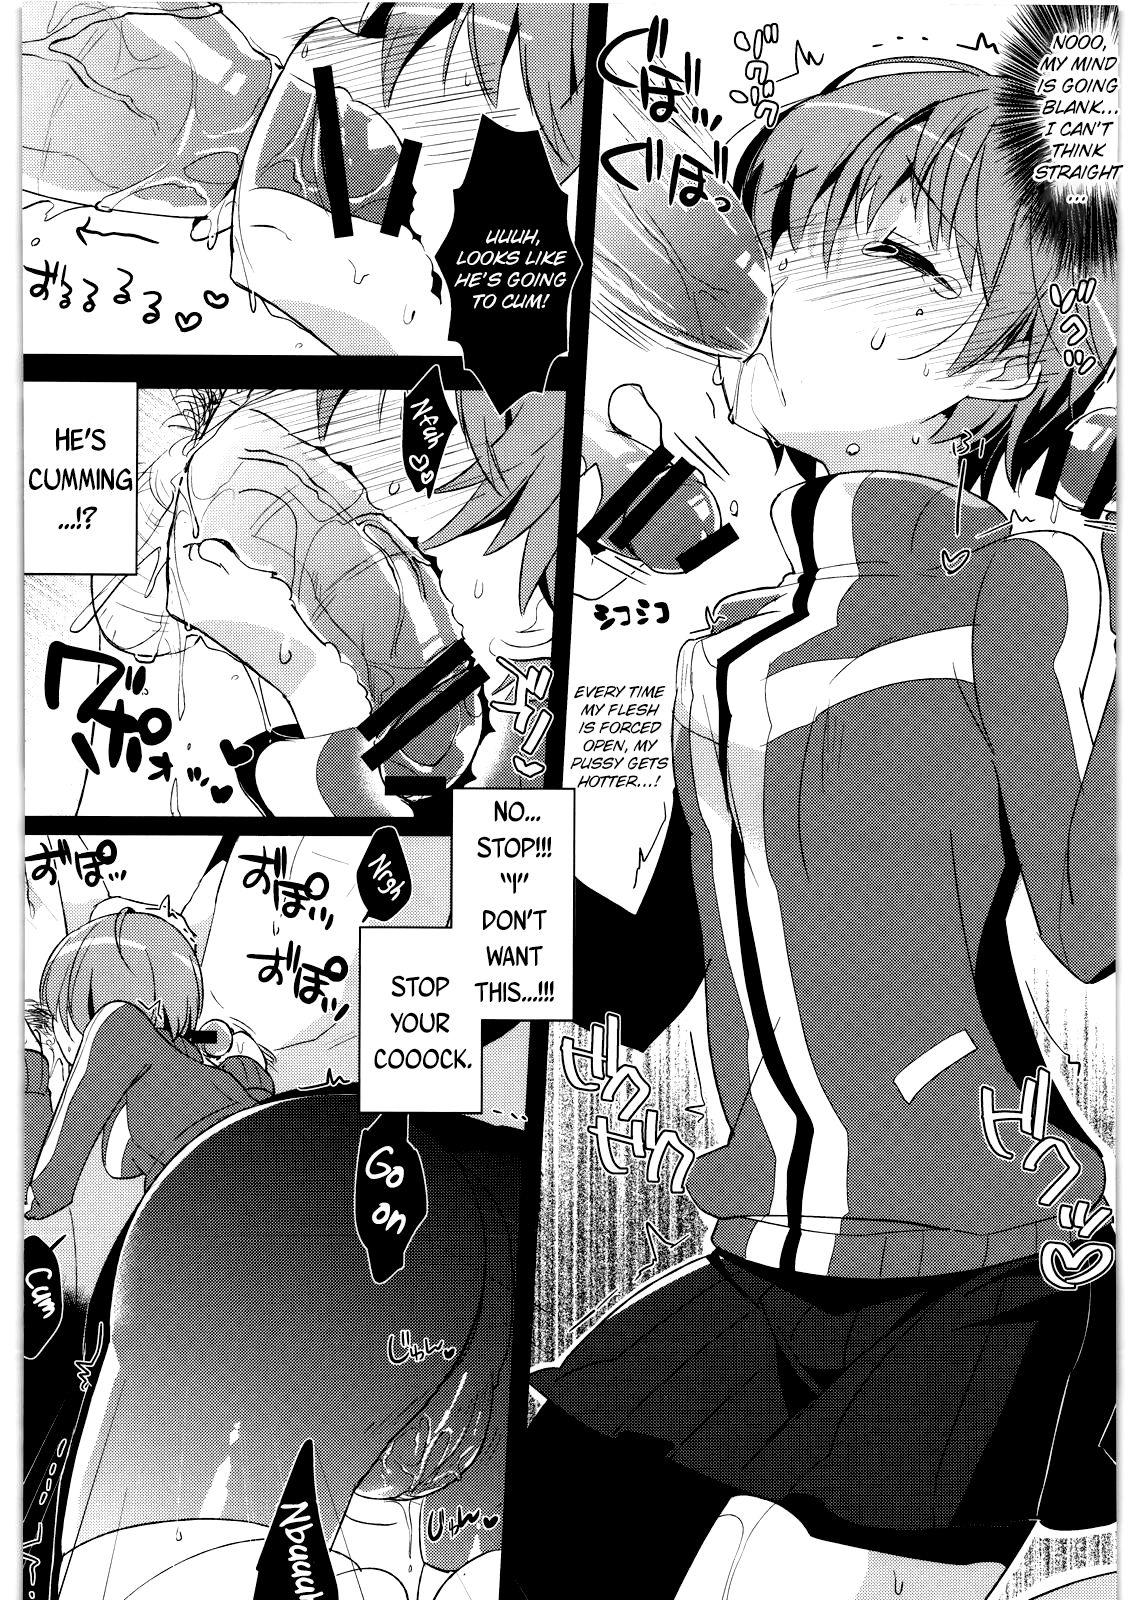 Straight PX - Persona 4 Blackdick - Page 9